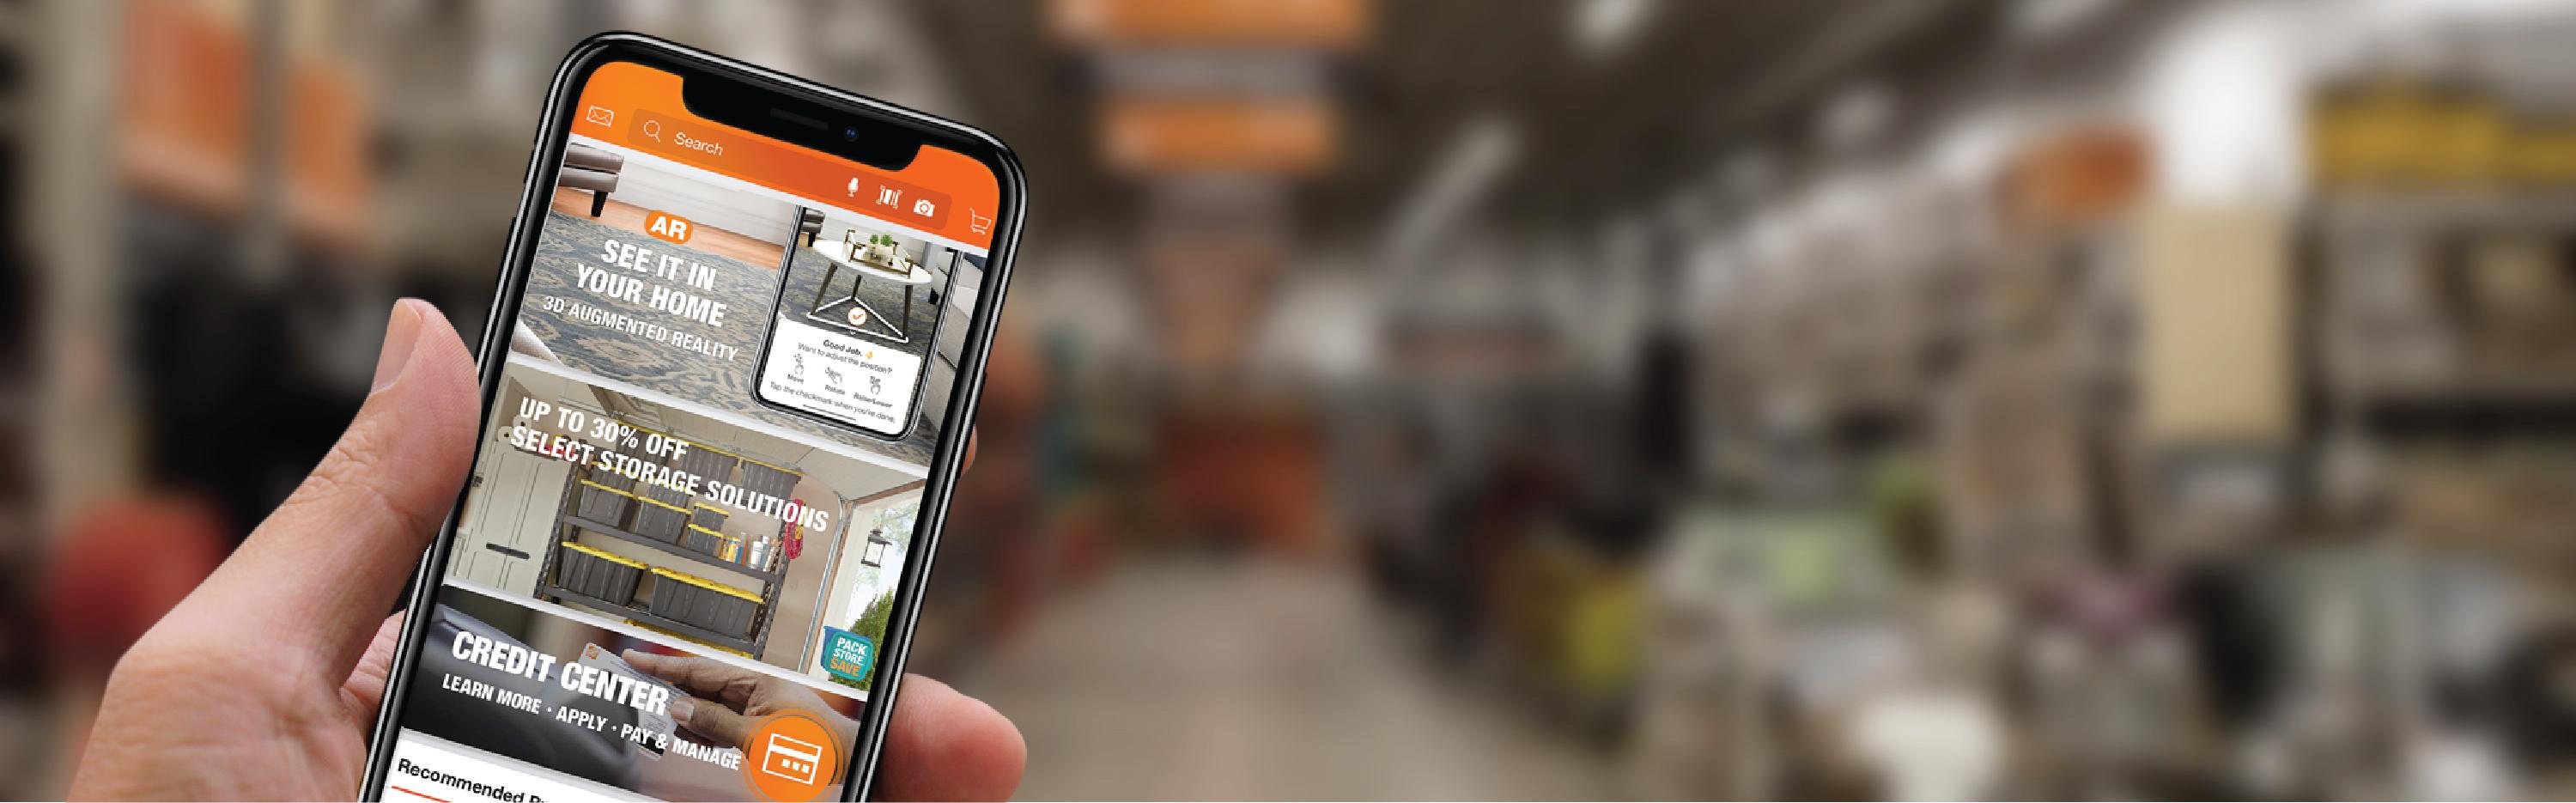 5 Technologies Changing How We Shop | The Home Depot